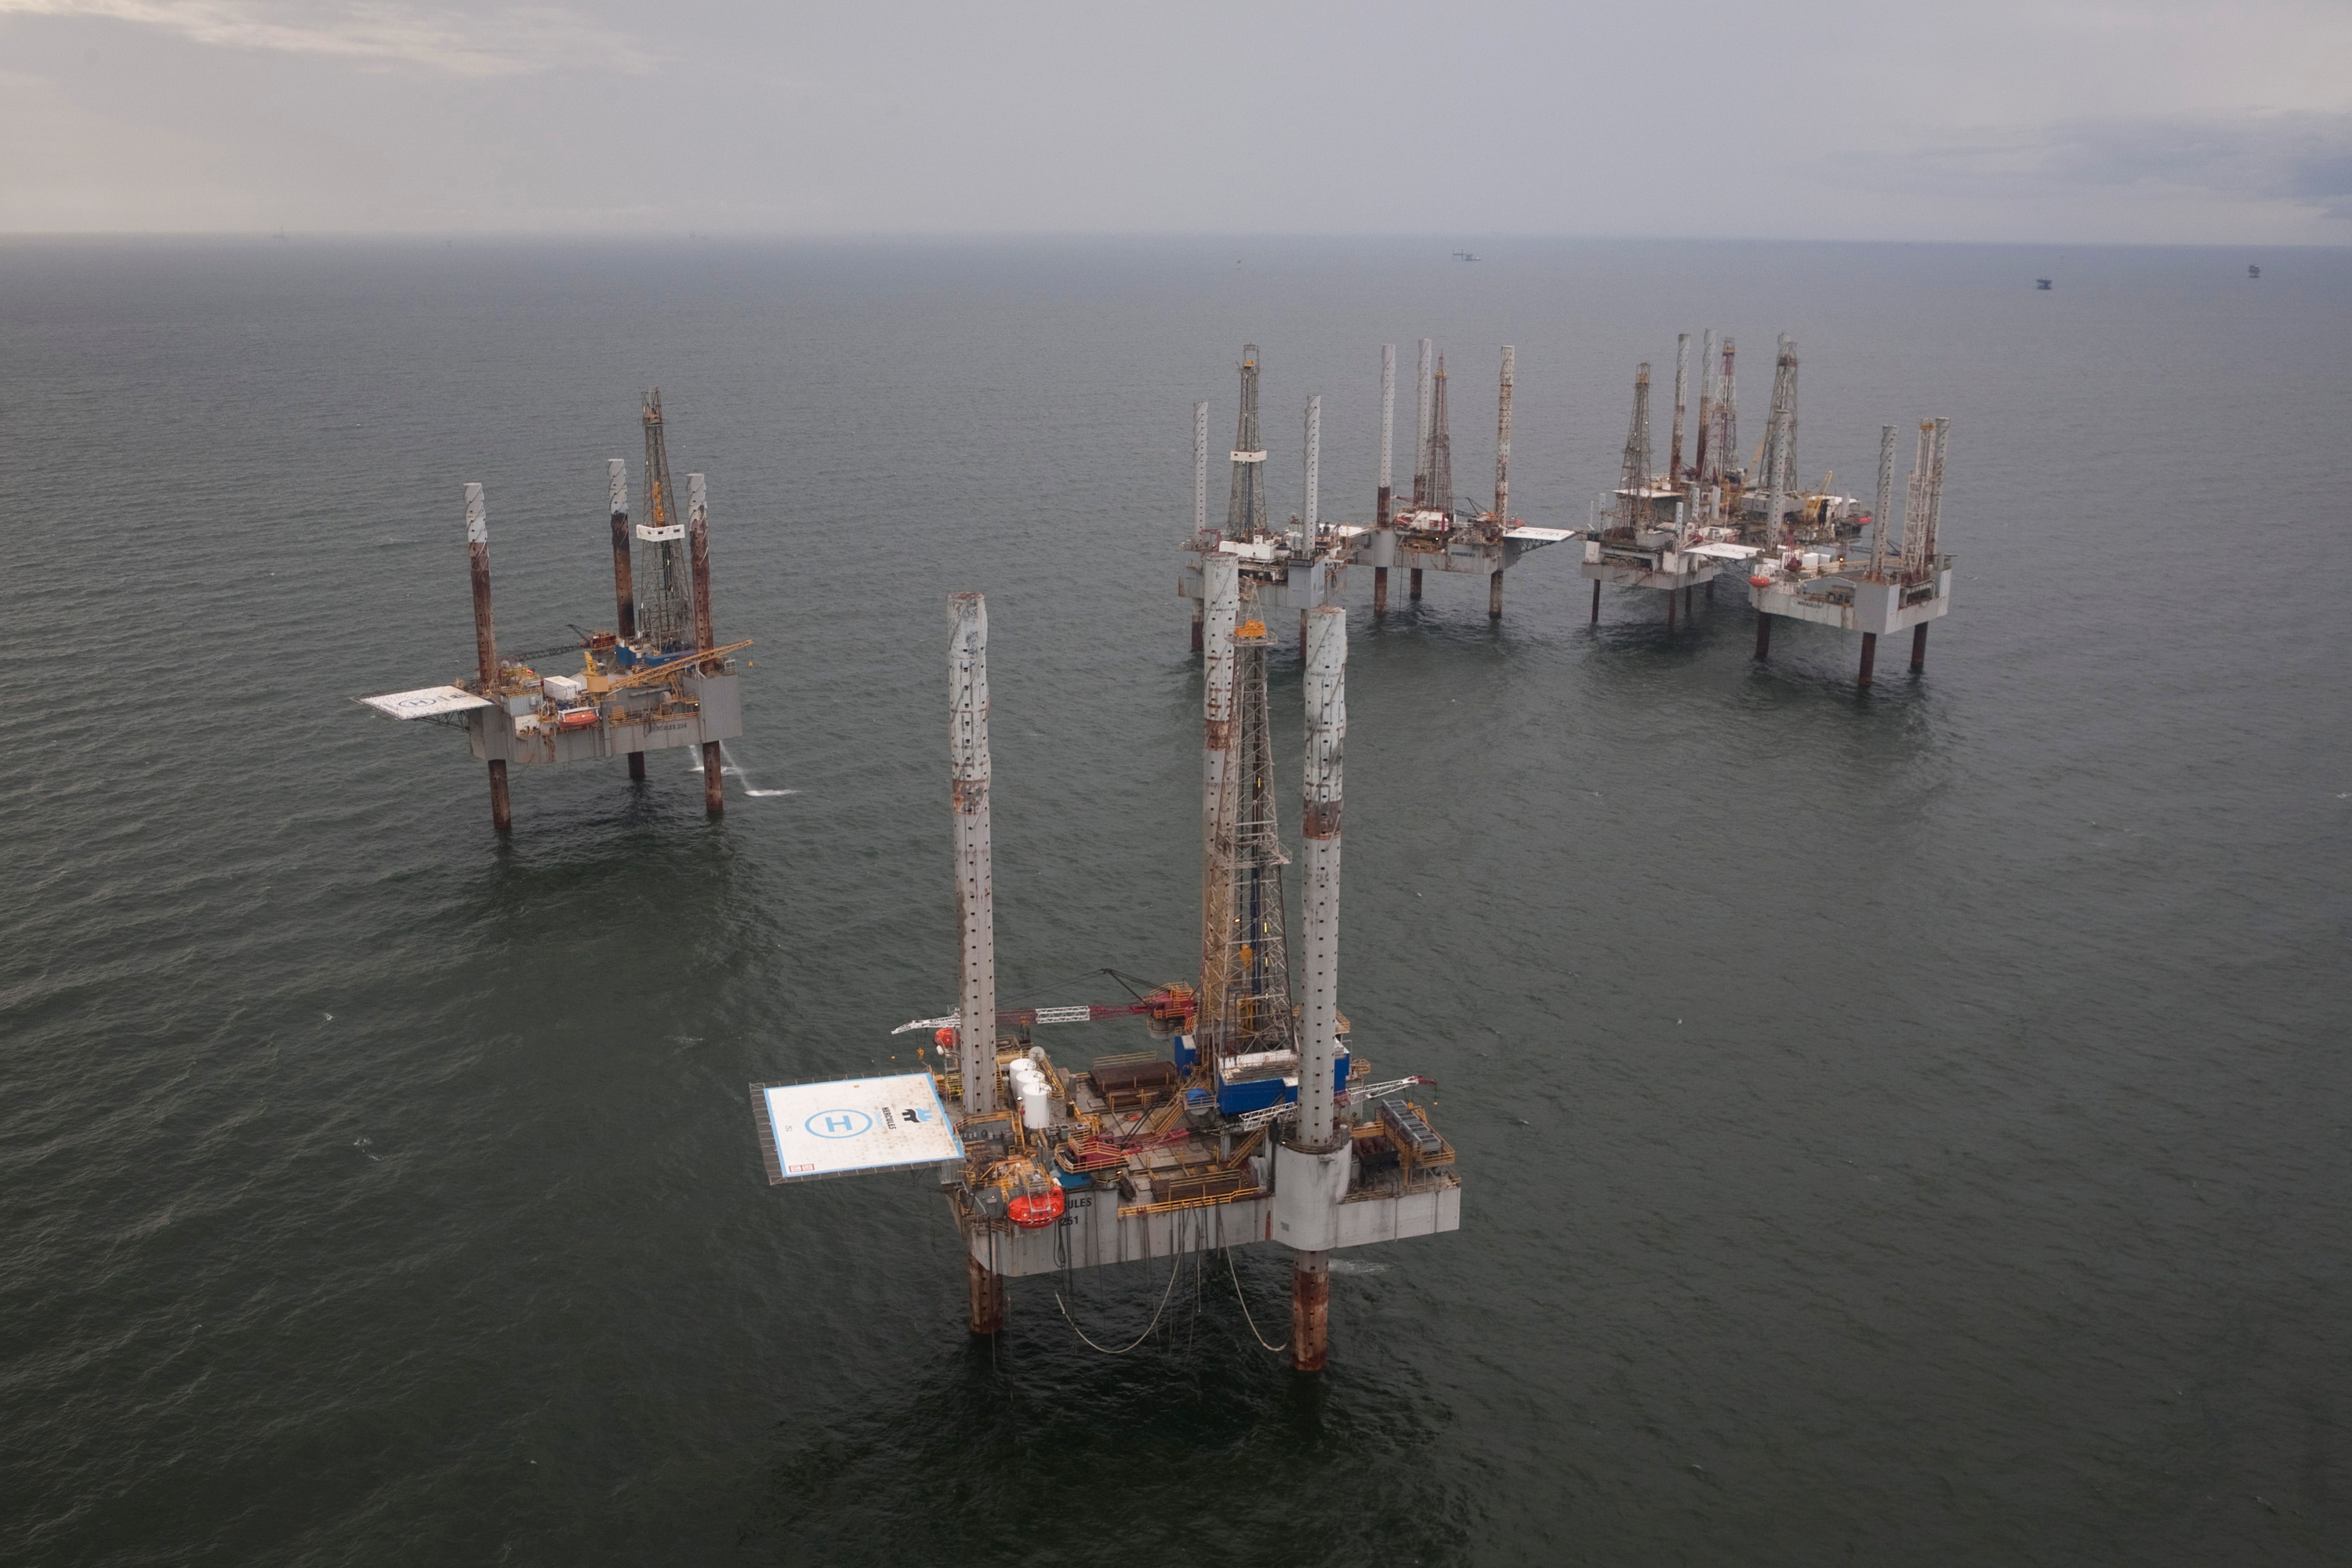 Unused oil rigs sit in the Gulf of Mexico near Port Fourchon, Louisiana August 11, 2010. REUTERS/Lee Celano/File Photo